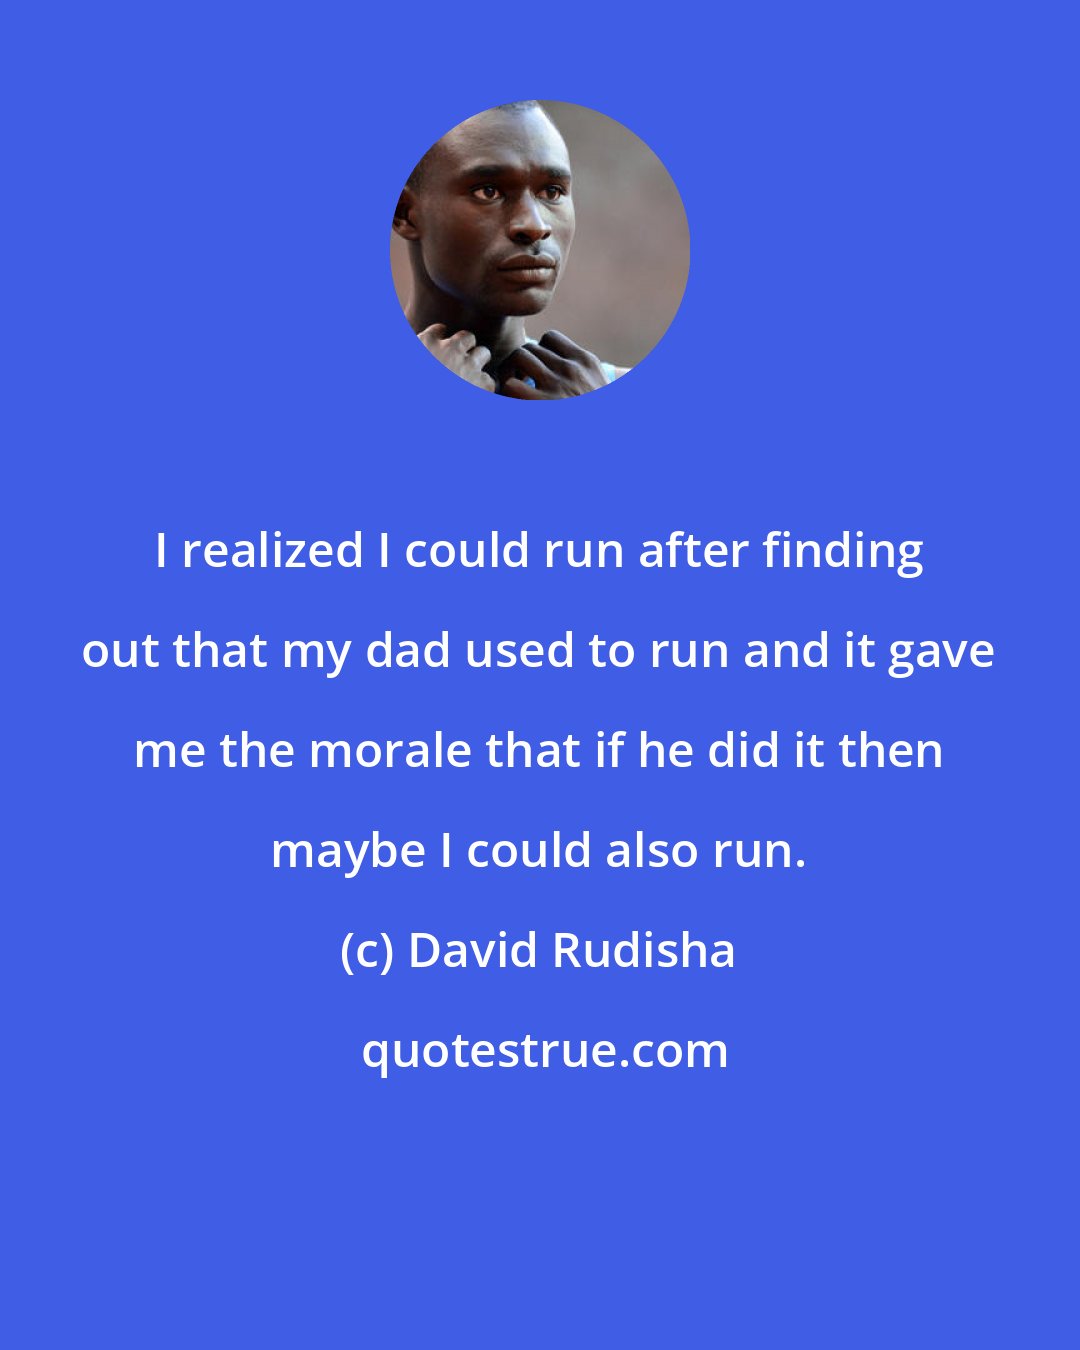 David Rudisha: I realized I could run after finding out that my dad used to run and it gave me the morale that if he did it then maybe I could also run.